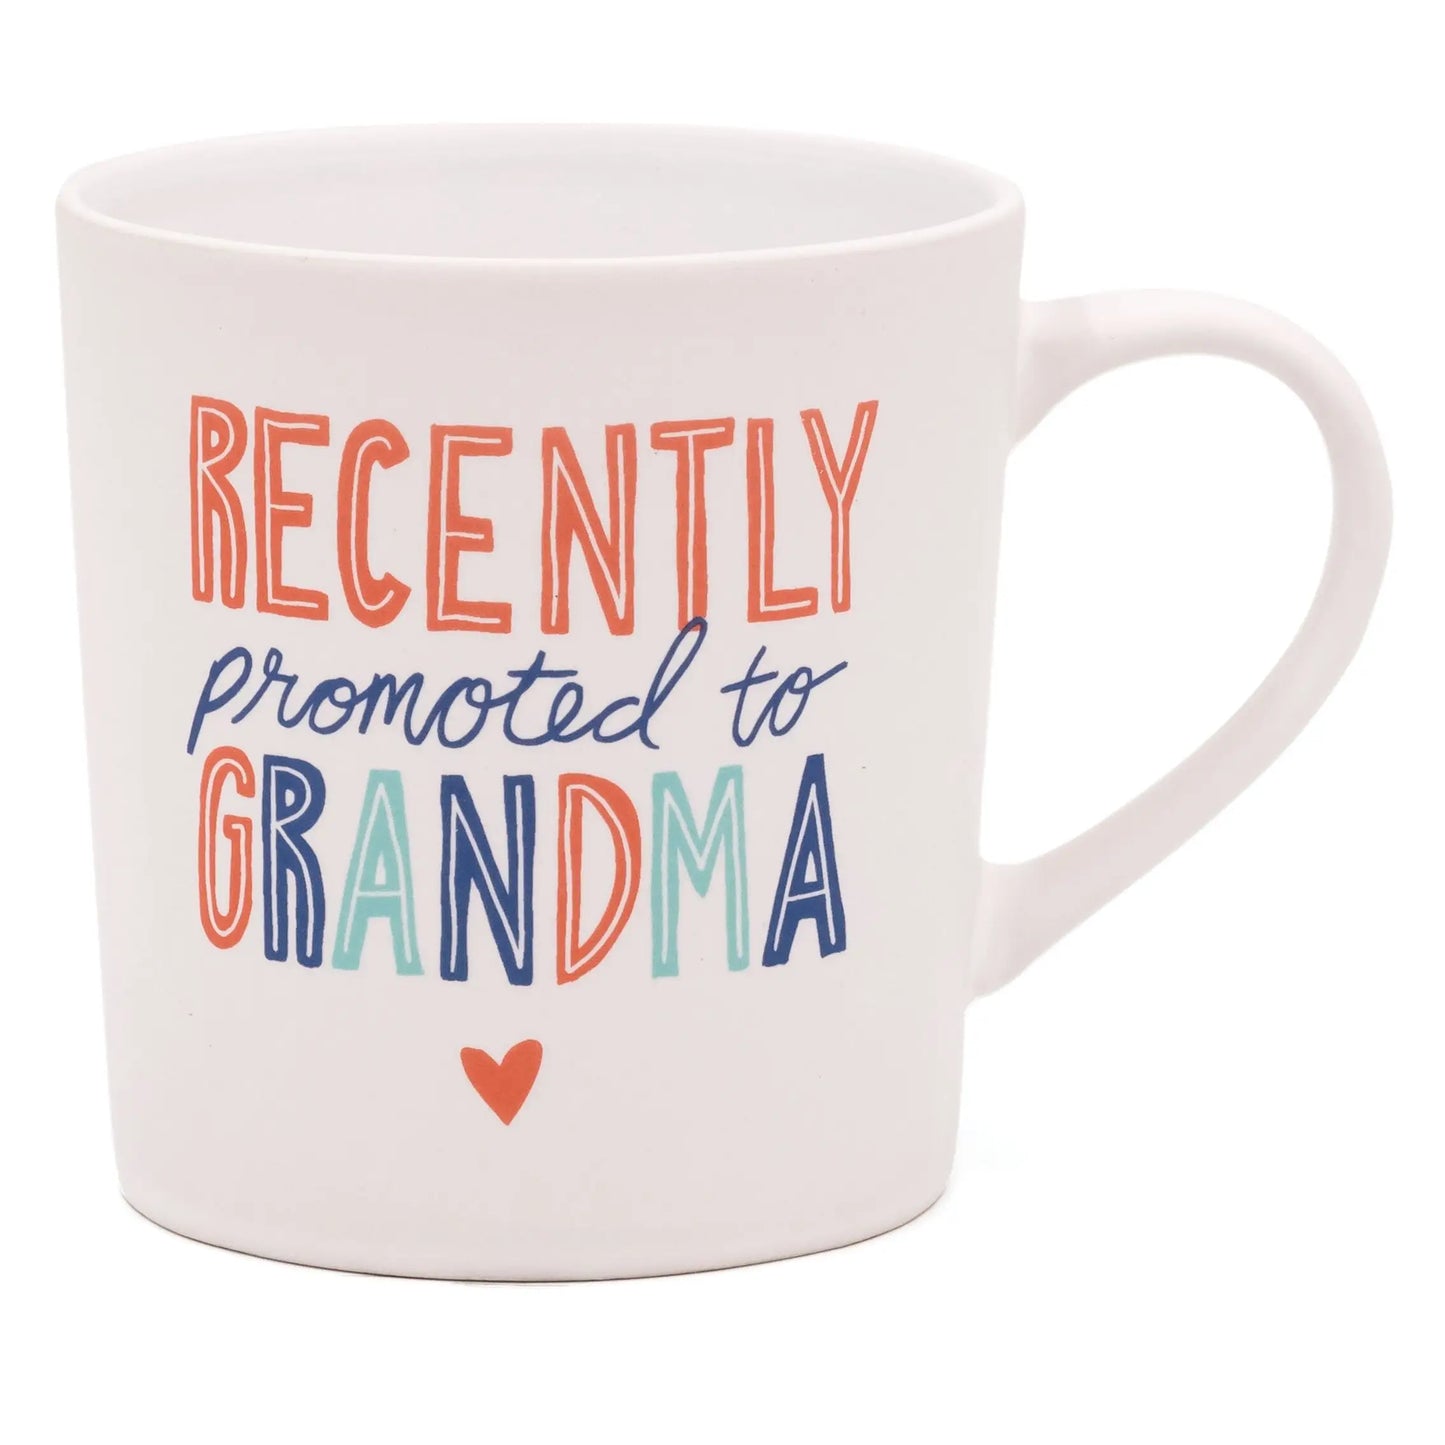 About Face Designs - Recently Promoted to Grandma Mug